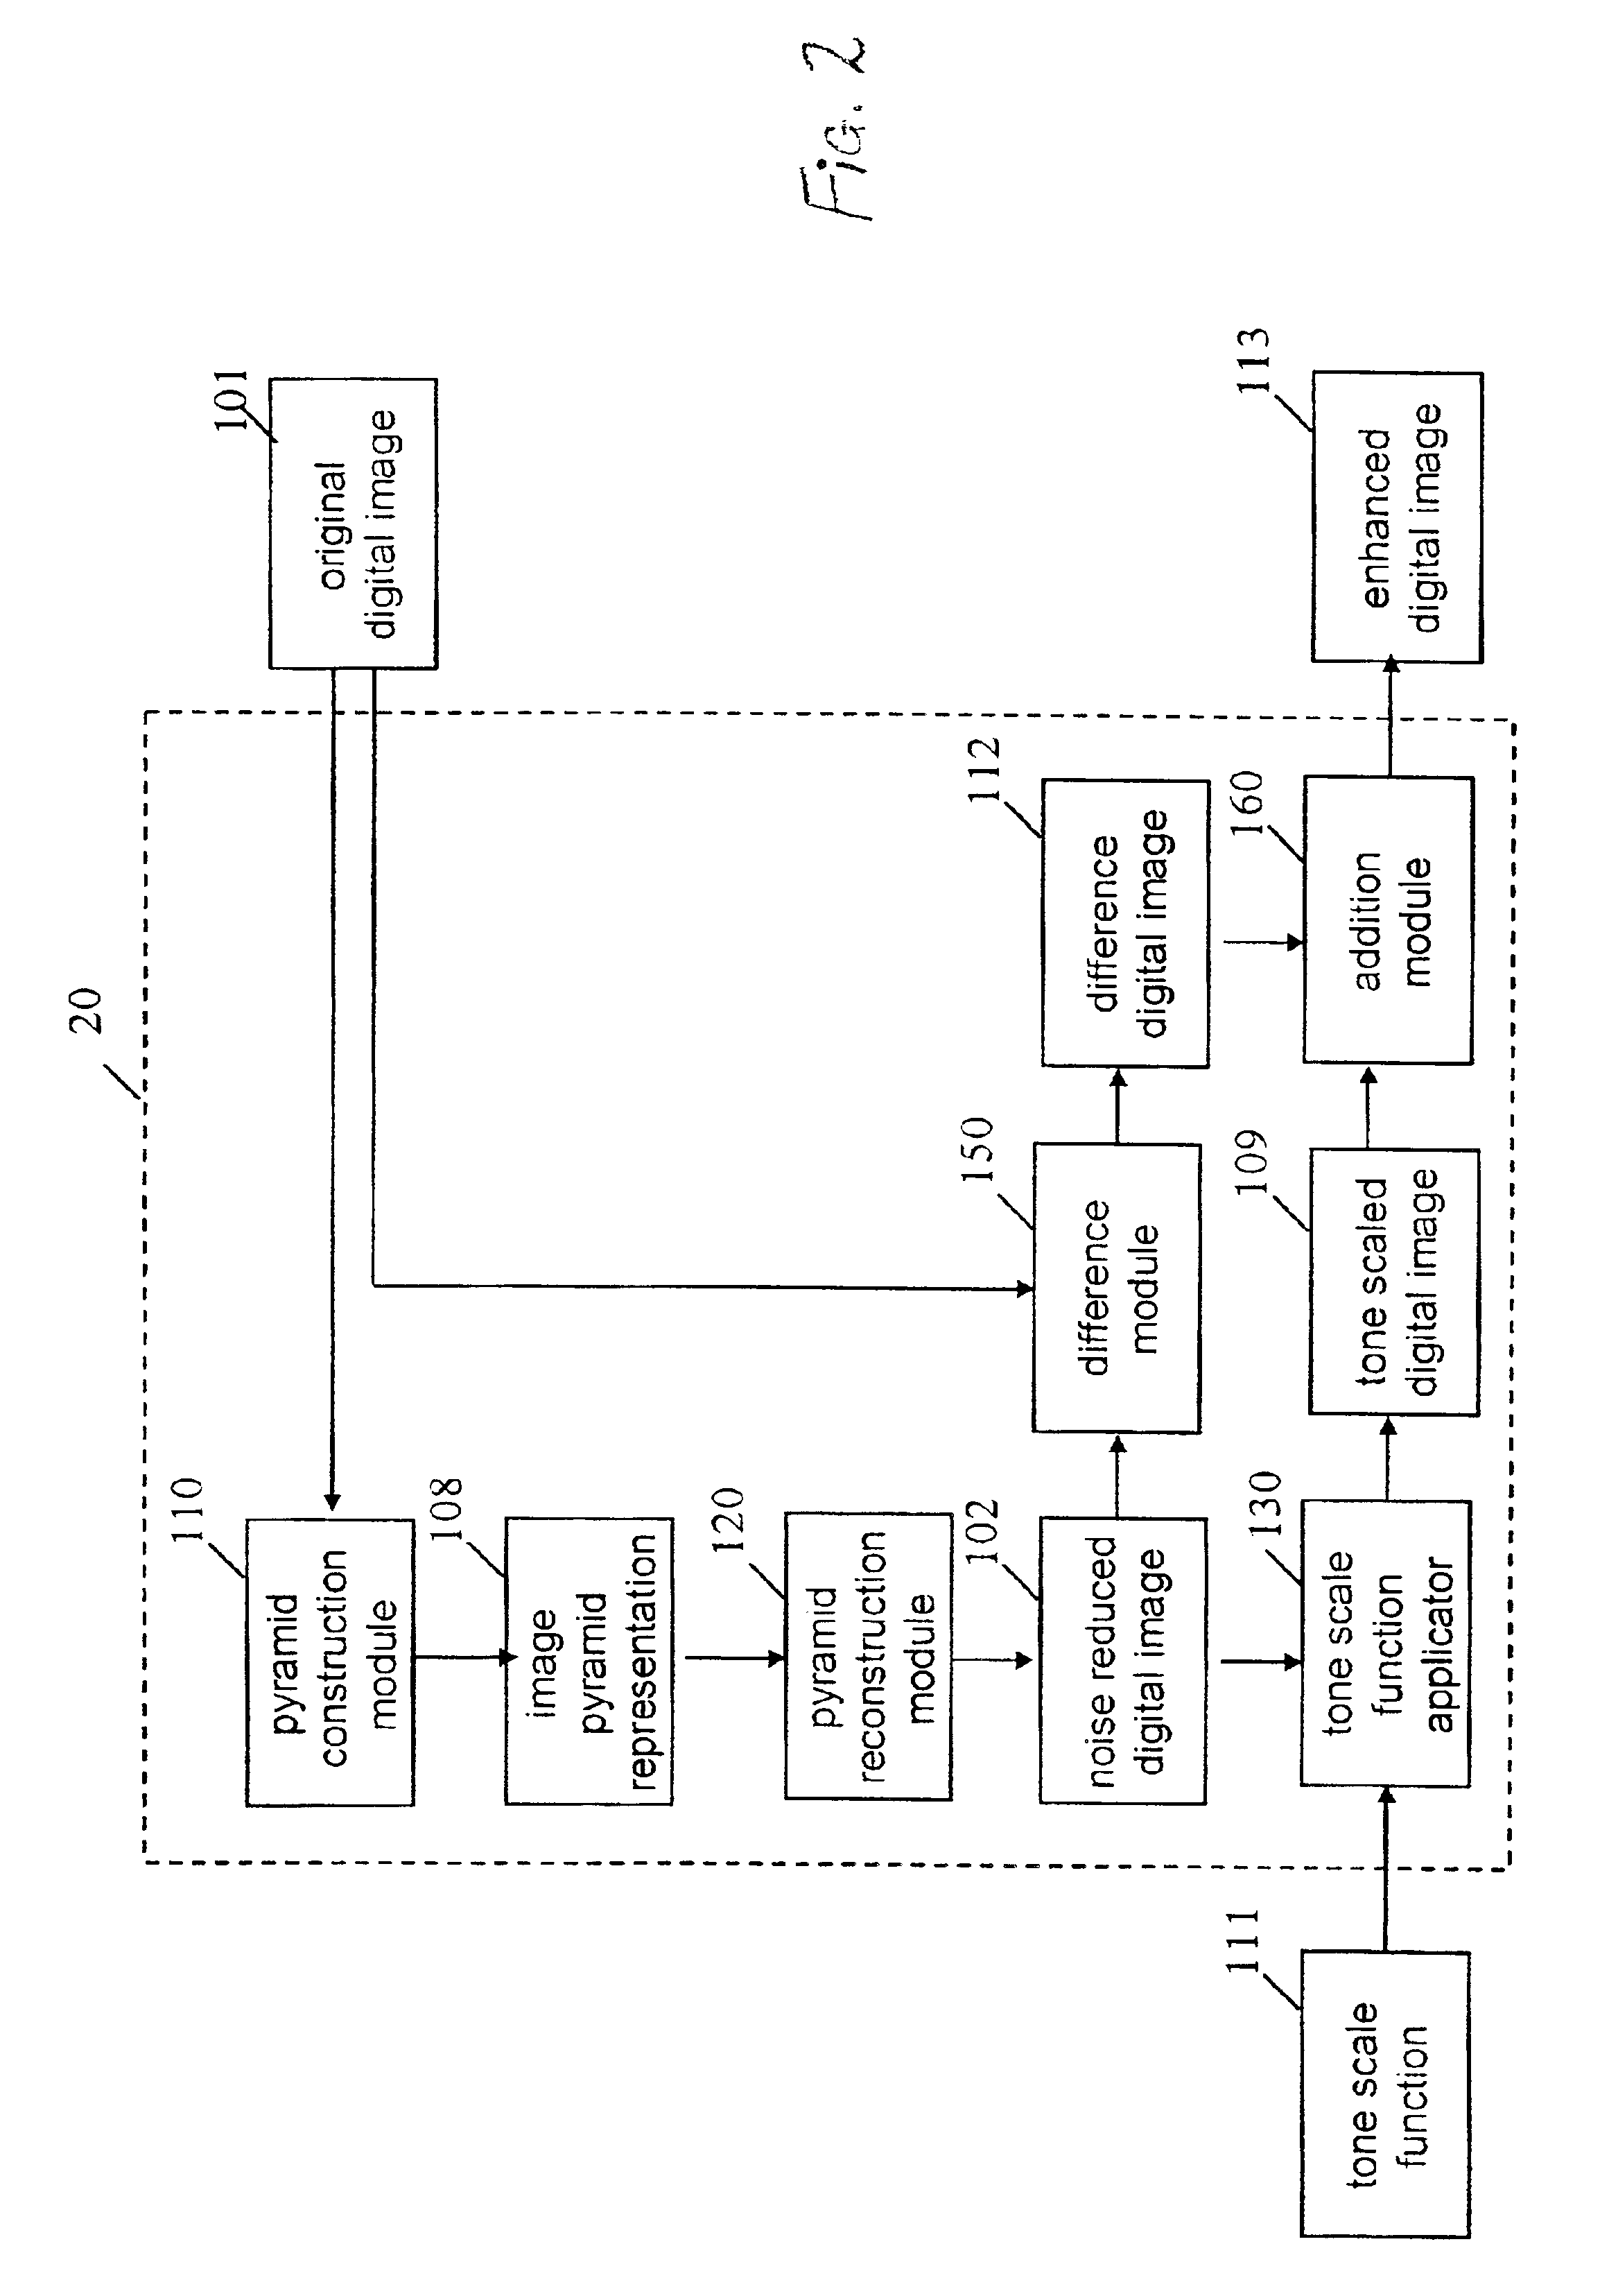 Method of enhancing the tone scale of a digital image to extend the linear response range without amplifying noise